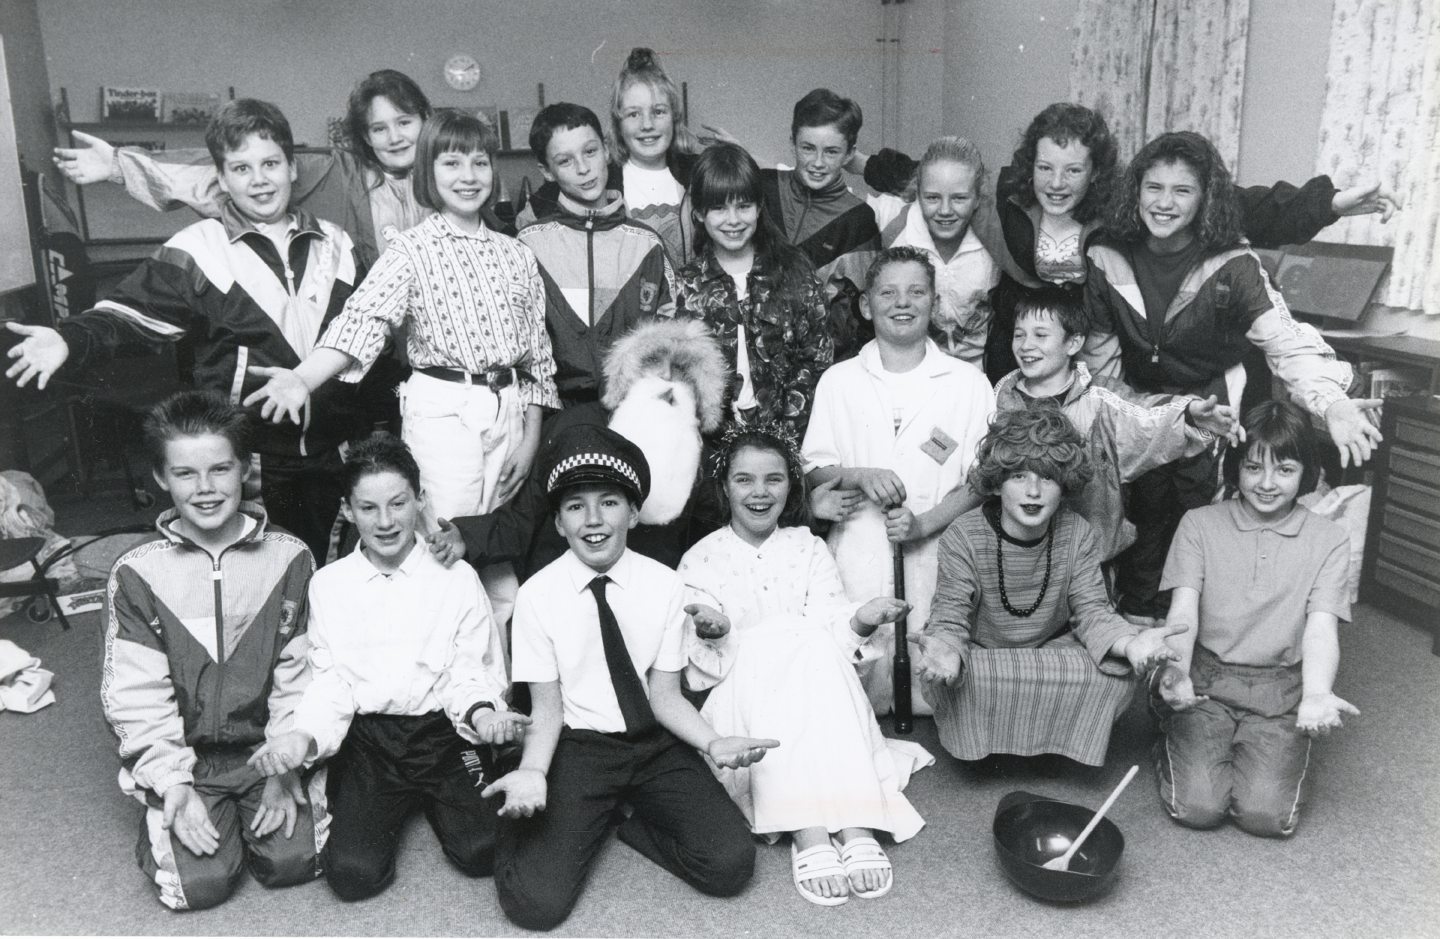 Primary 7 children from Danestone Primary School get ready to perform Star of Wonder at the school's Christmas concert, Spirit of Christmas in 1990.